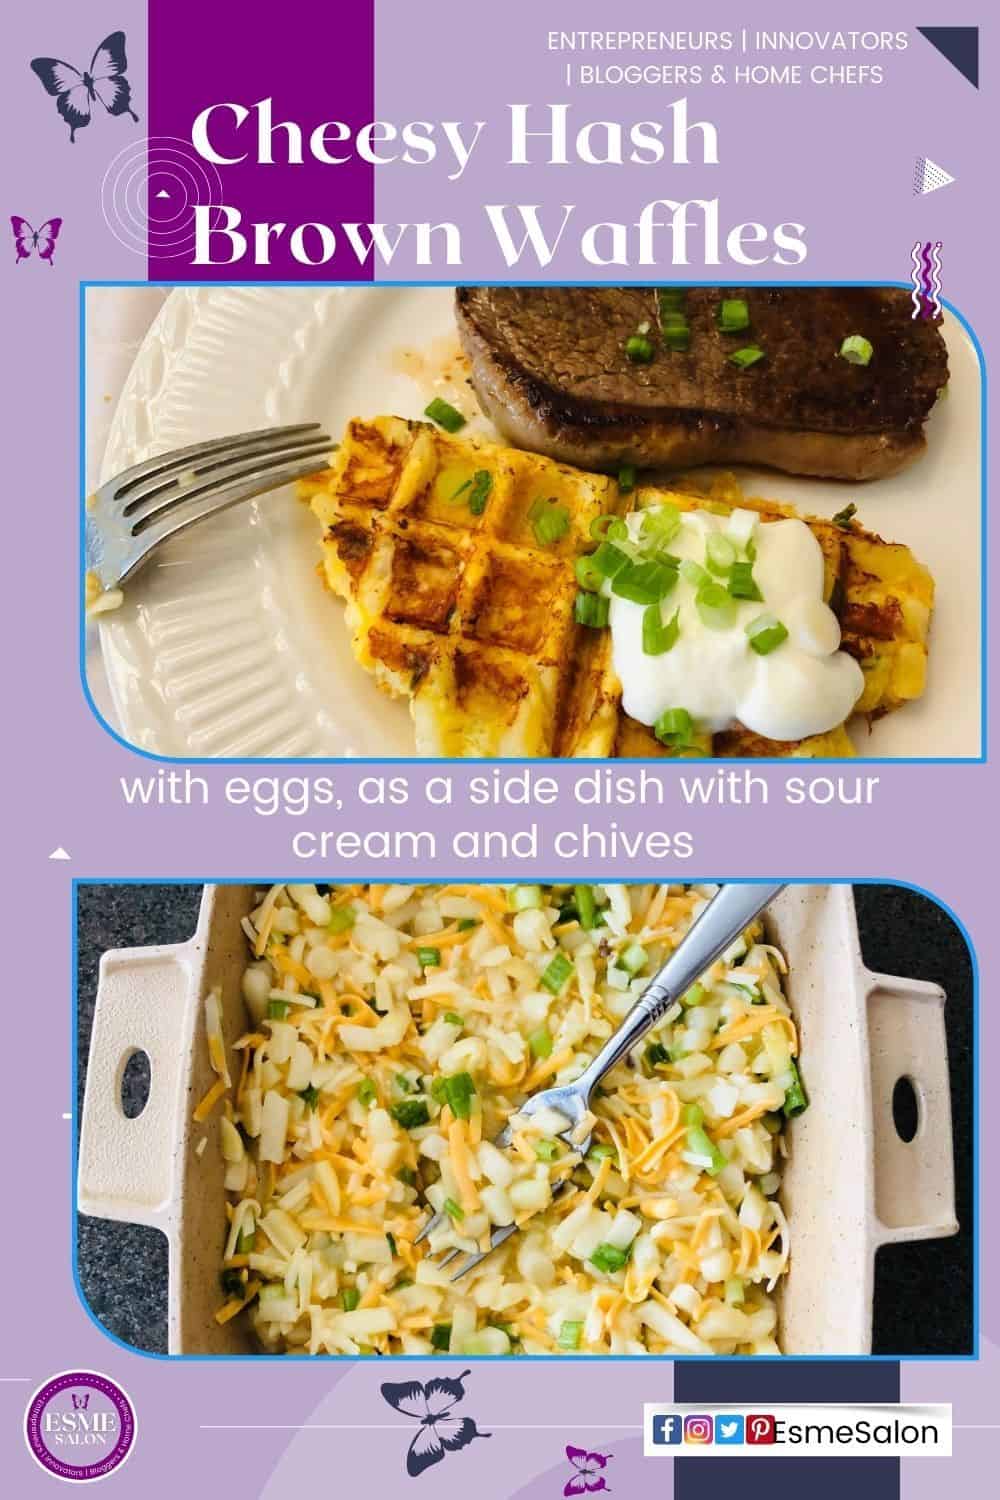 Plated Cheesy Hash Brown Waffle and a bowl with the ingredients, hash brown cubes, eggs, cheese, spring onion and cheese